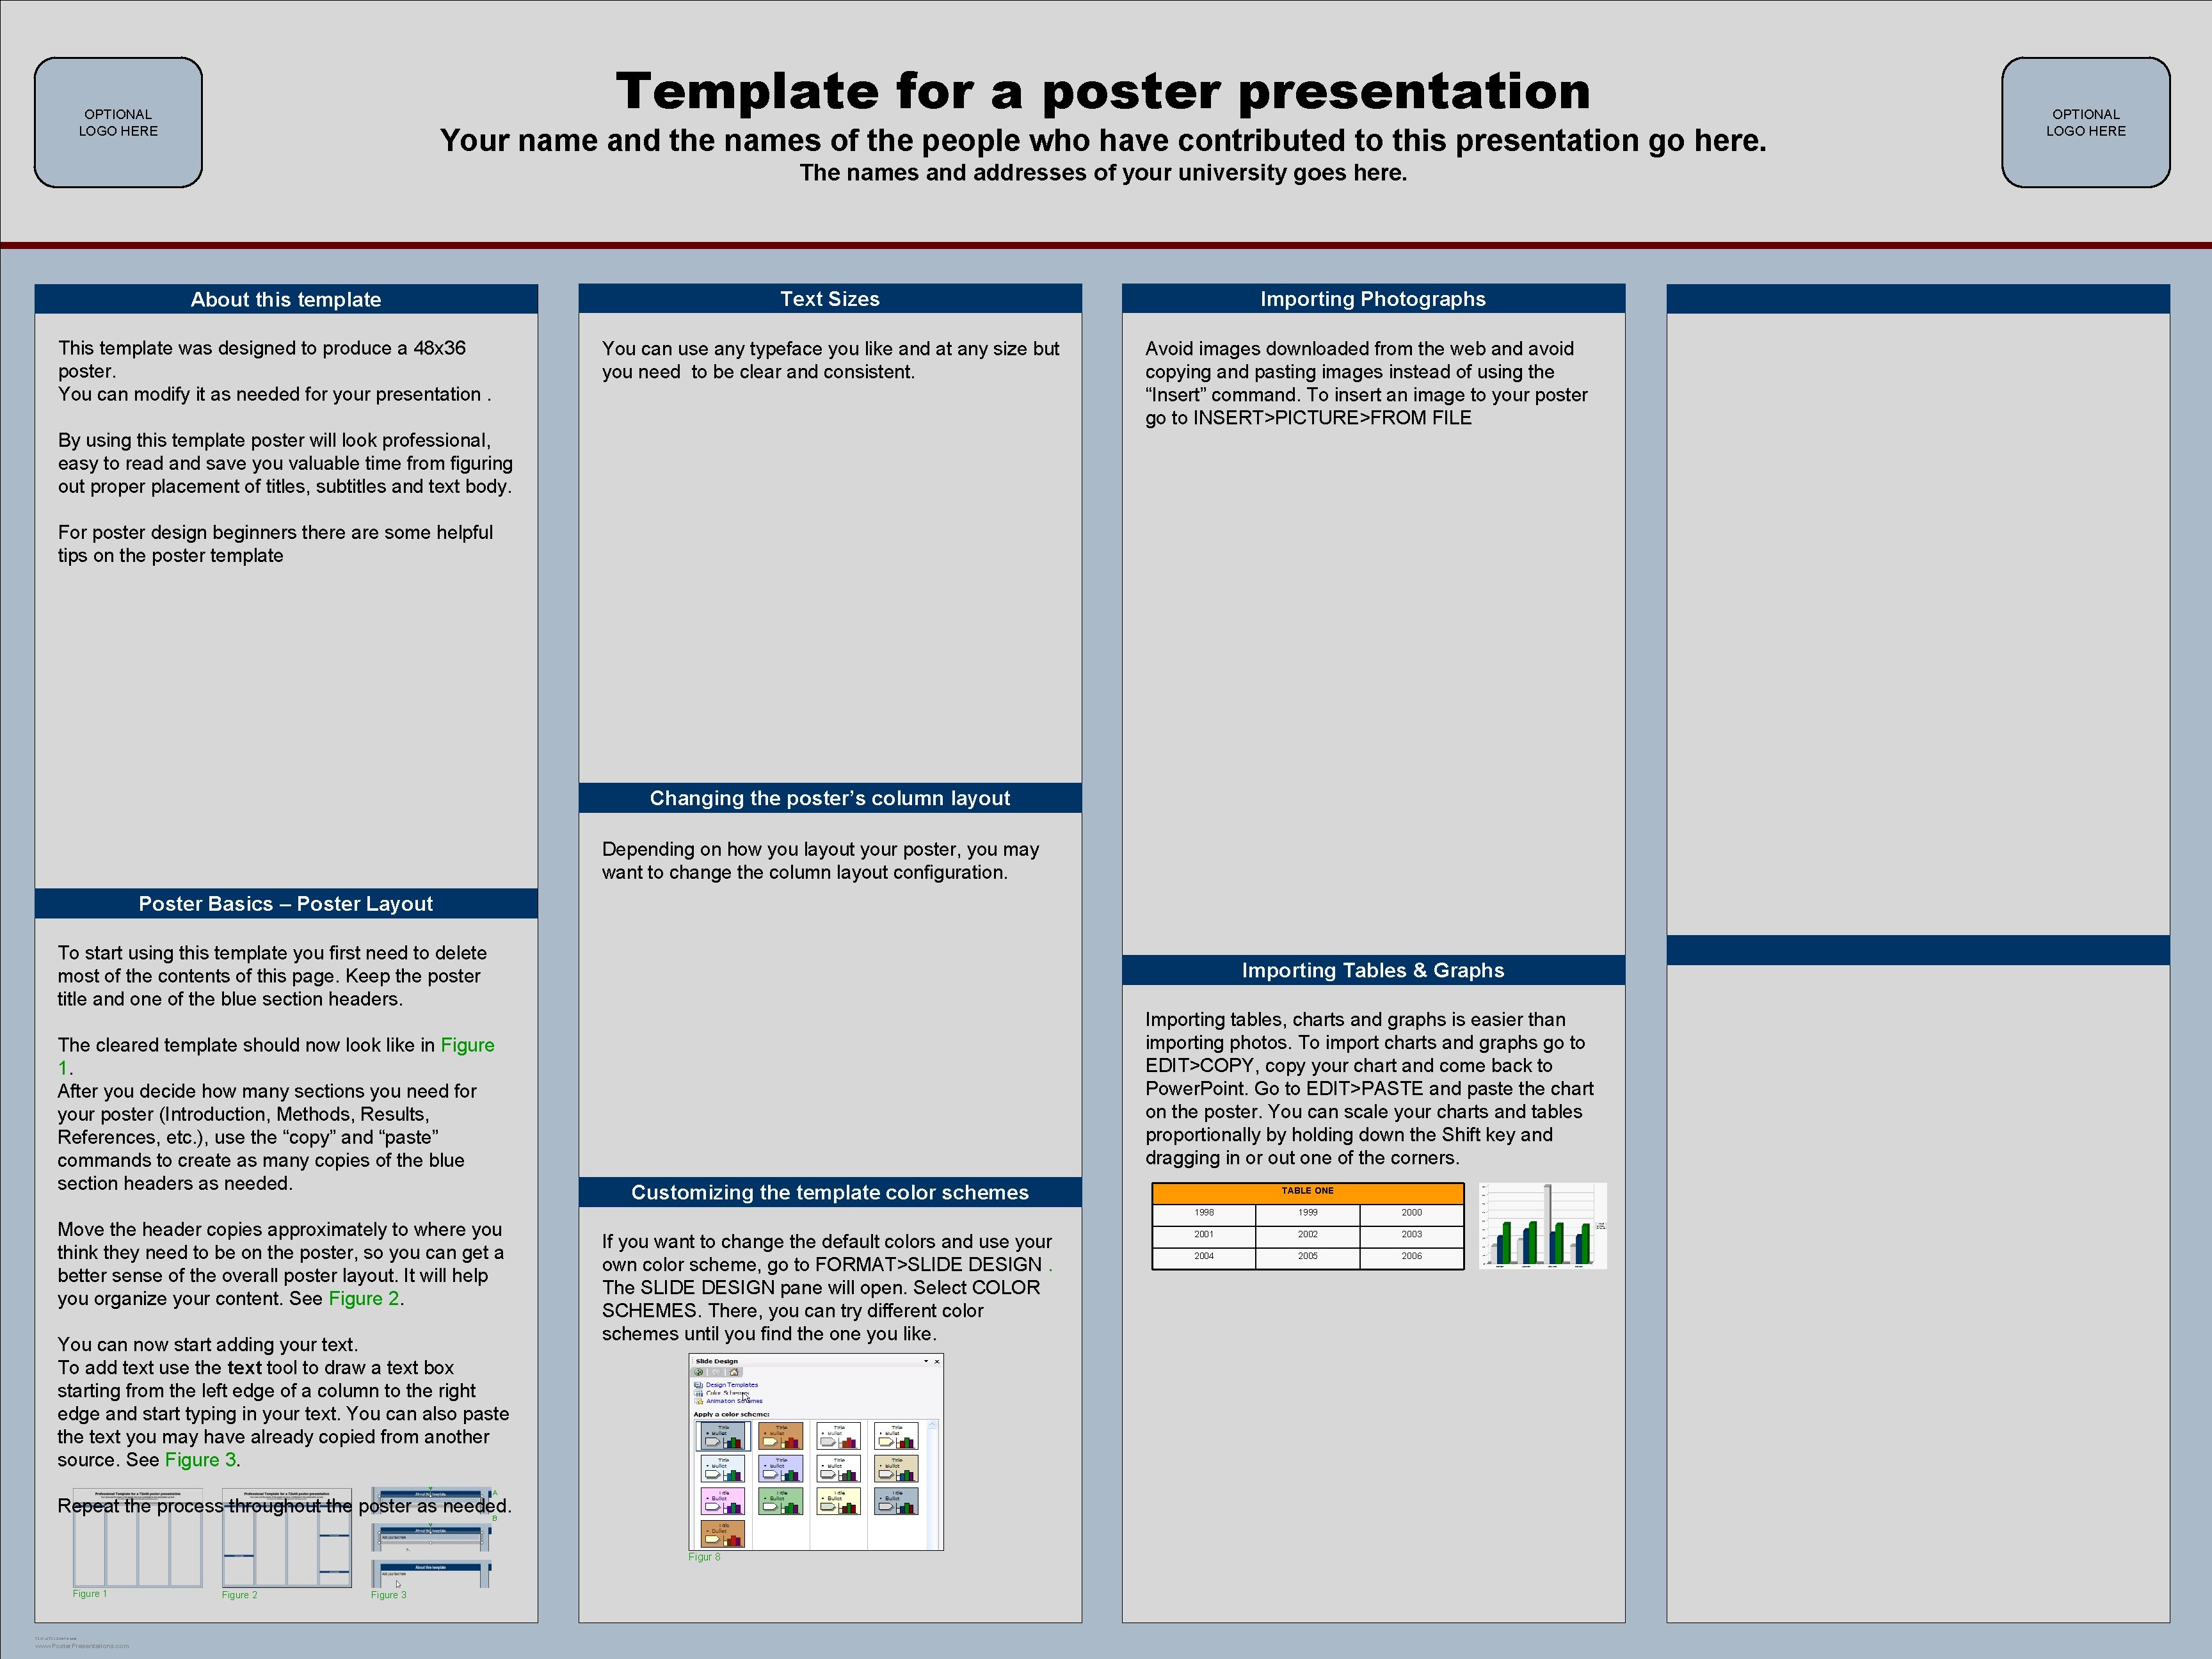 Template for a poster presentation OPTIONAL LOGO HERE Your name and the names of